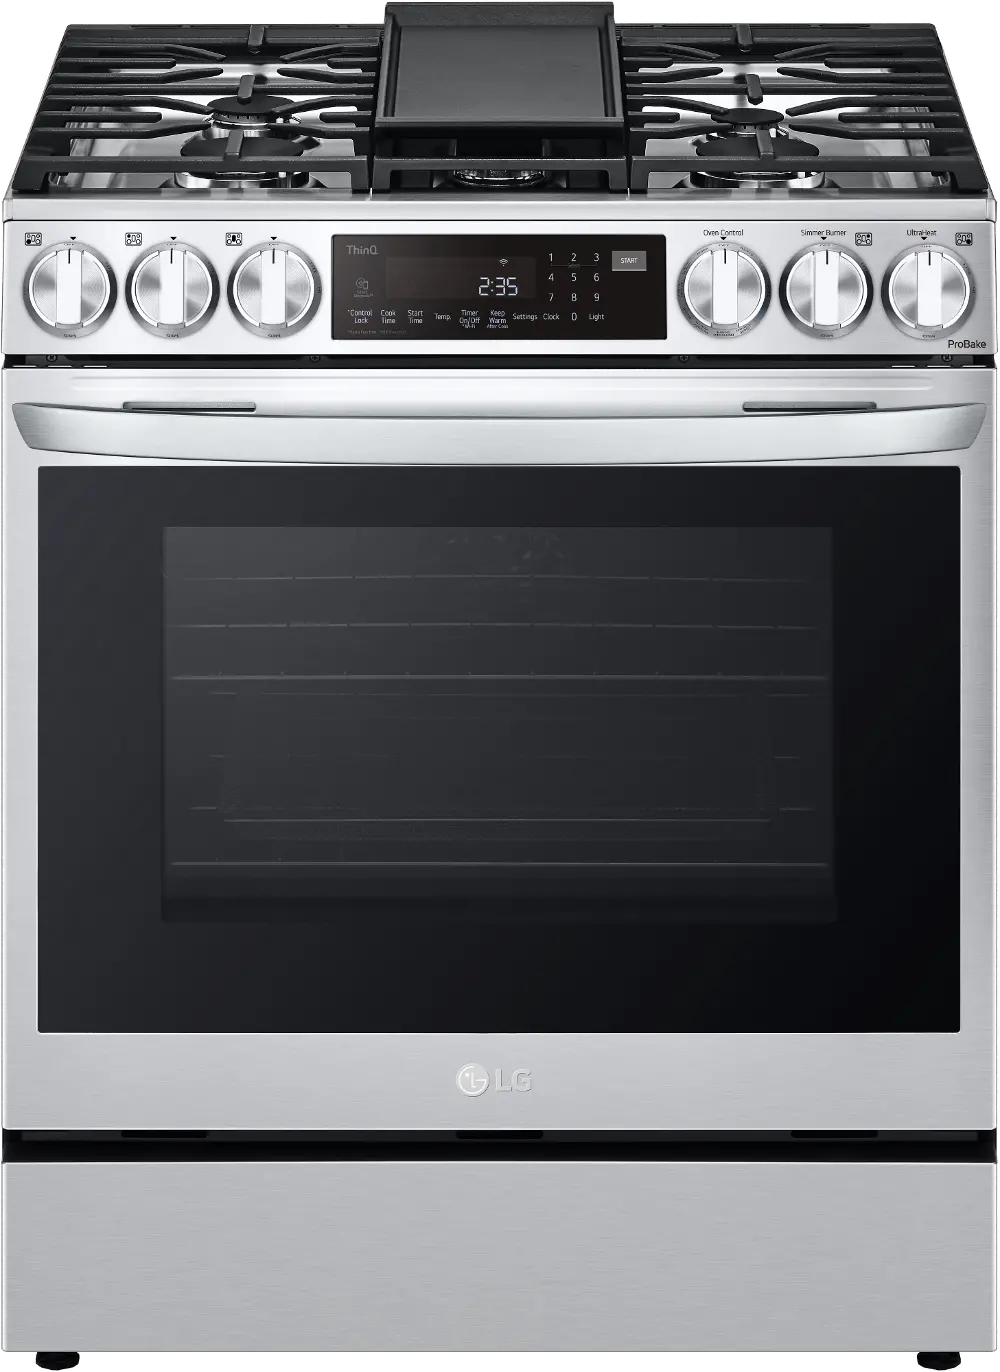 LSGL6335F LG 6.3 cu ft Gas Range with InstaView -Stainless Steel-1